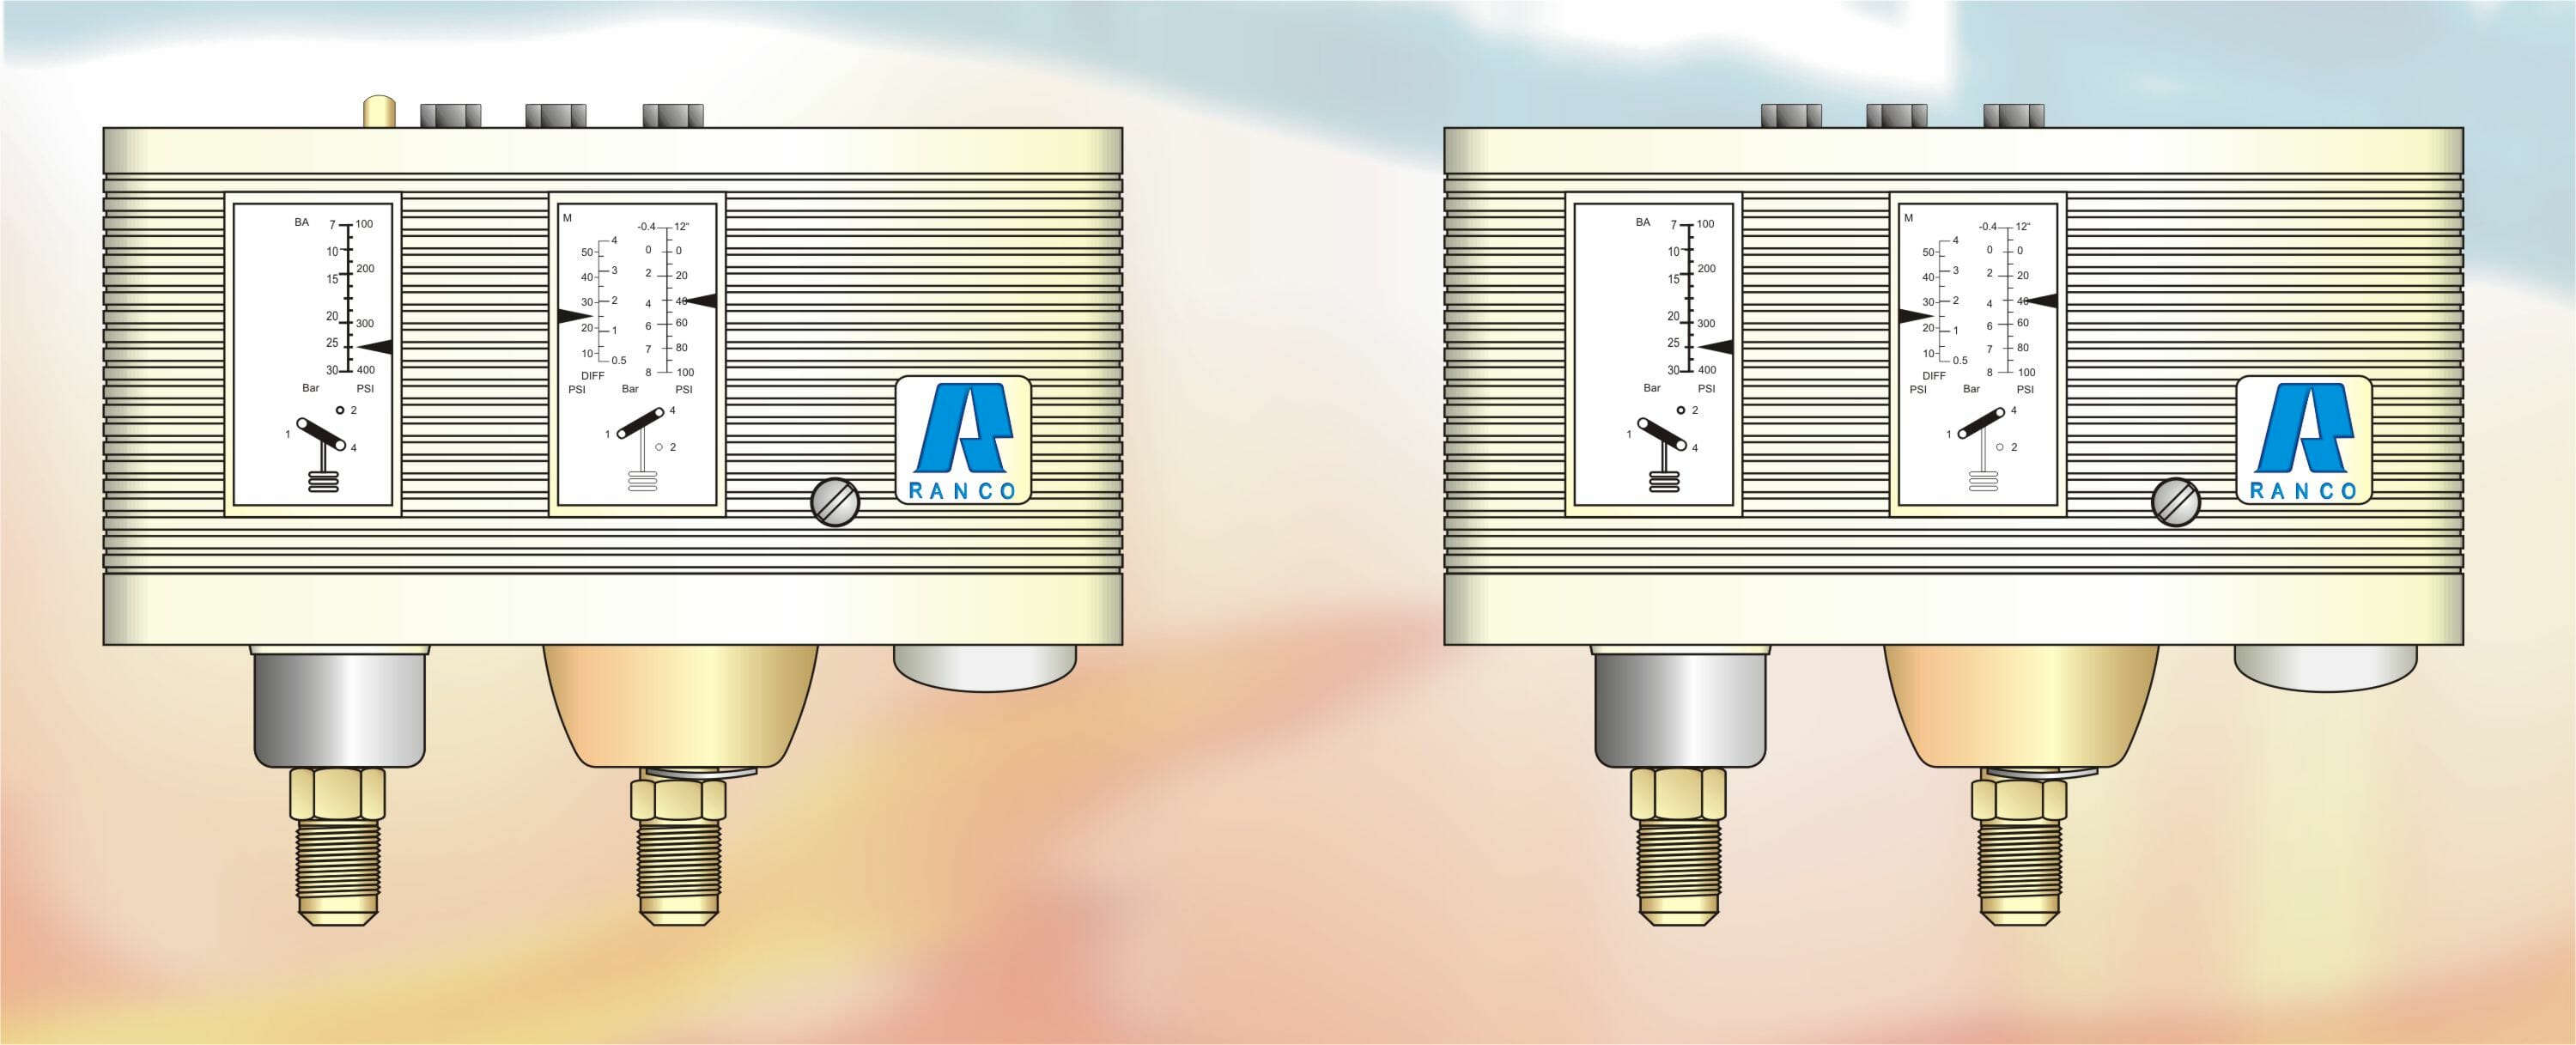 Dual-Pressure-Switches